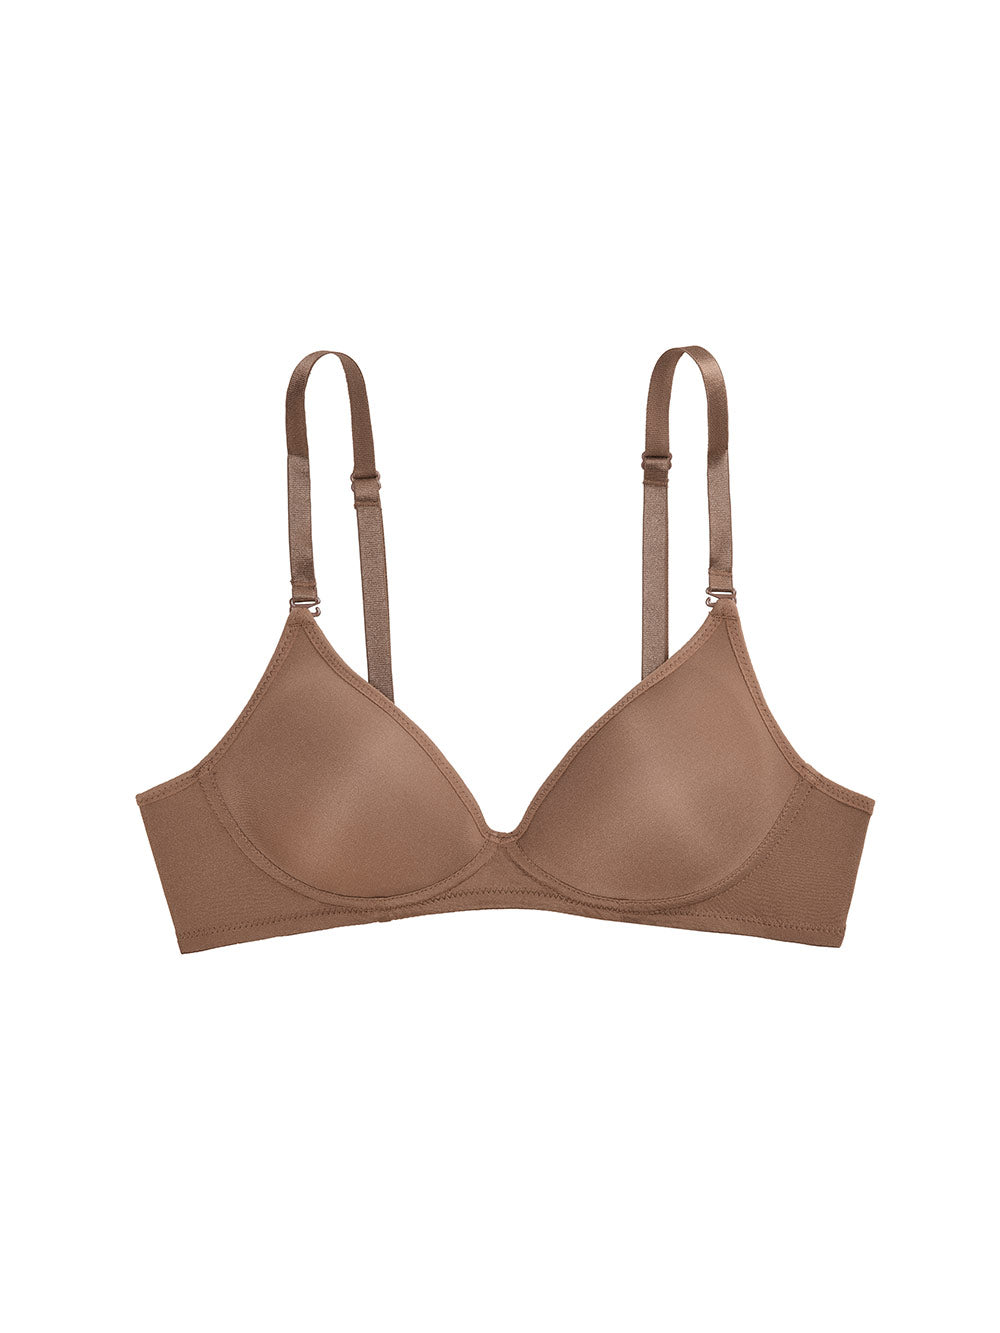 Zivame 38a Pink Grey Sports Bra - Get Best Price from Manufacturers &  Suppliers in India